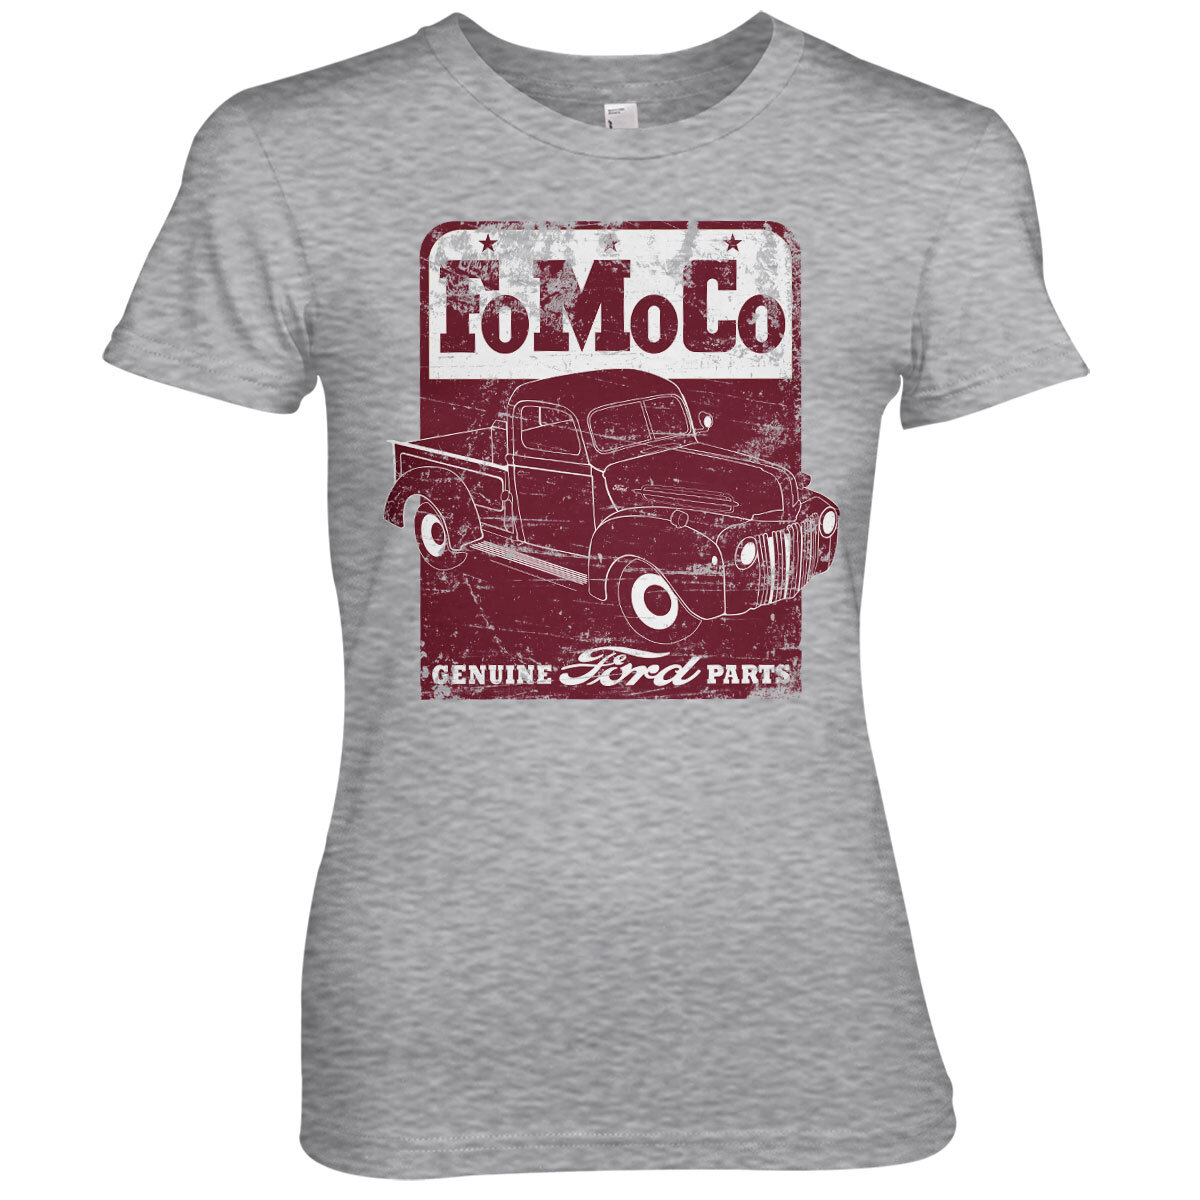 FoMoCo - Genuine Ford Parts Girly Tee